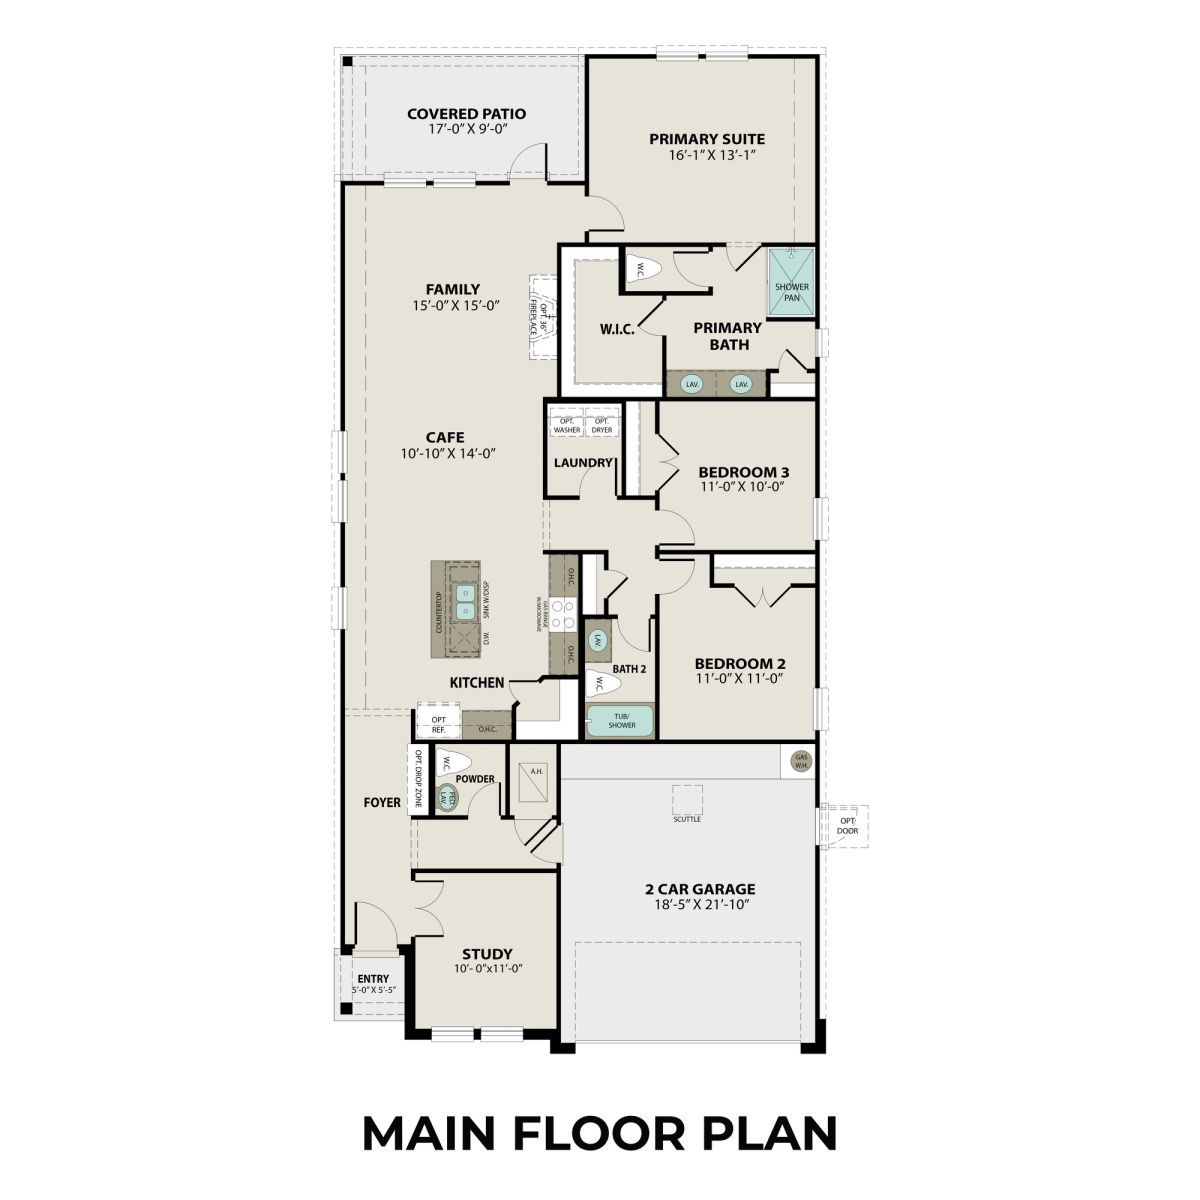 1 - The Riviera A buildable floor plan layout in Davidson Homes' Sunterra community.